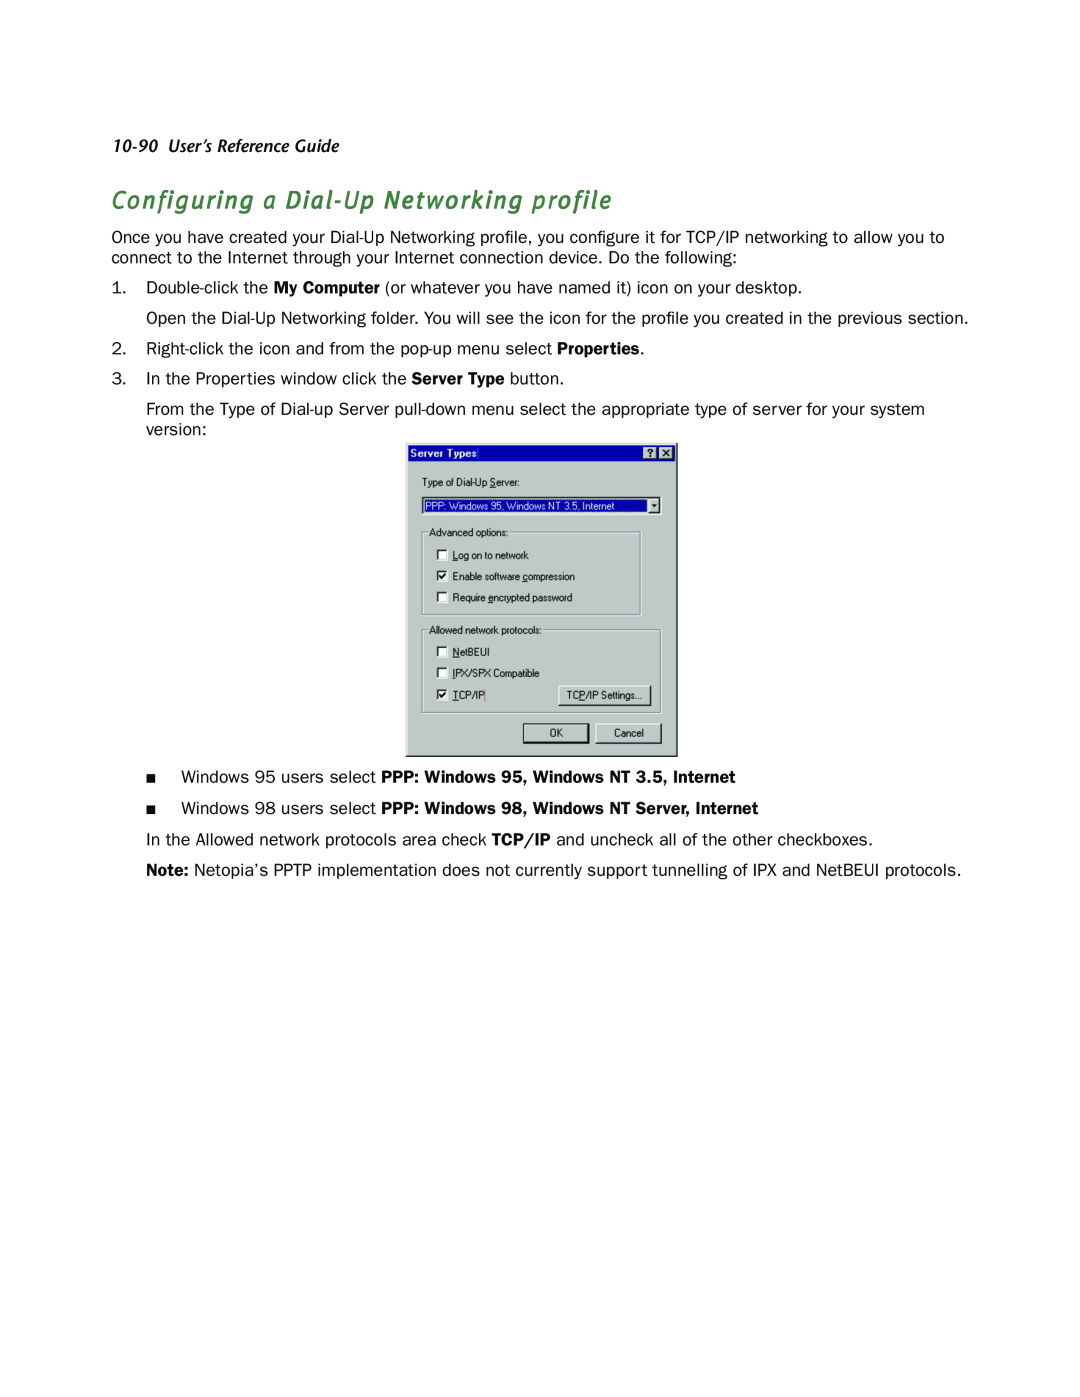 Netopia R910 manual Configuring a Dial-Up Networking profile, User’s Reference Guide 